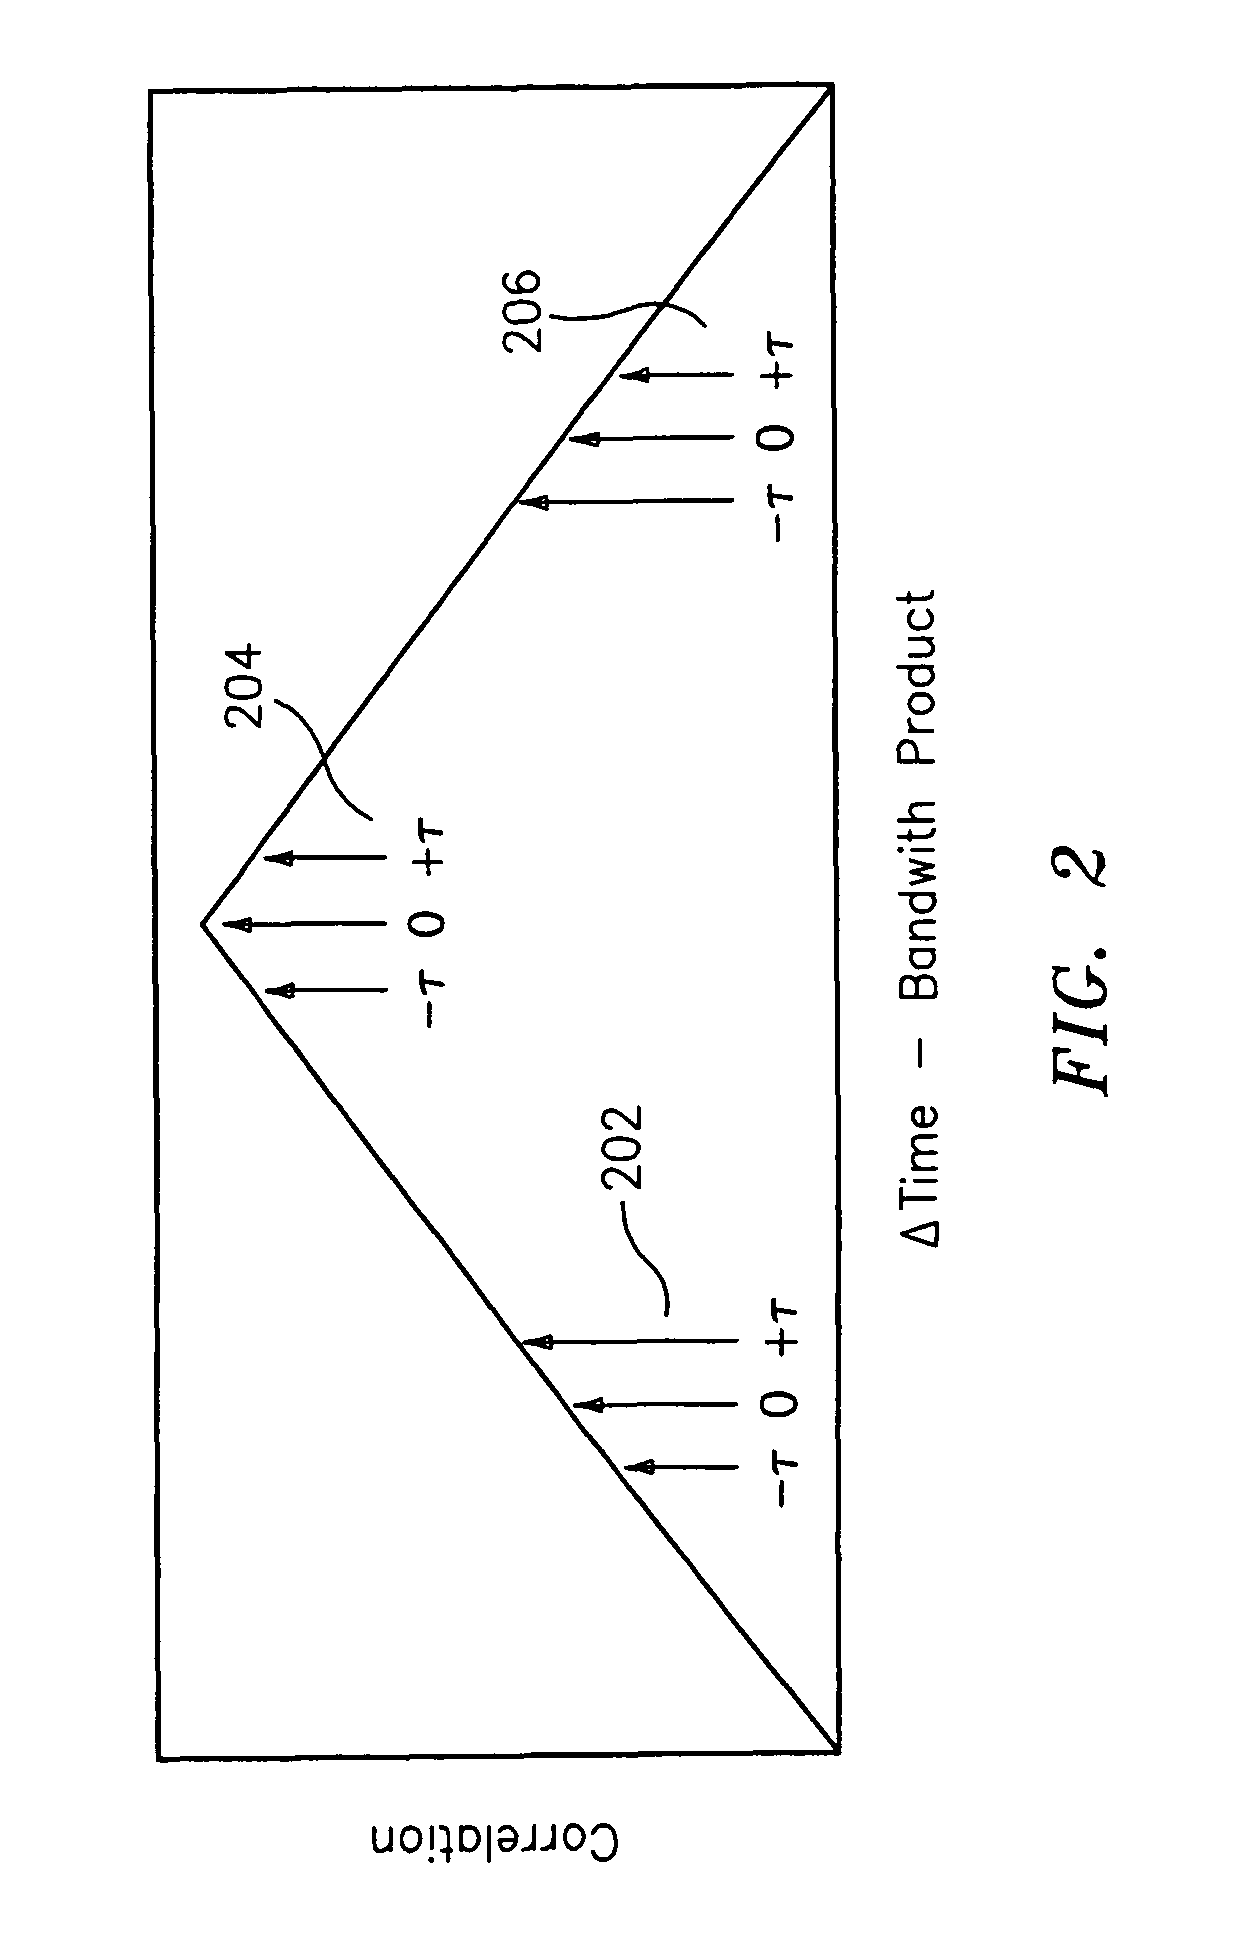 Variable time delay control structure for channel matching